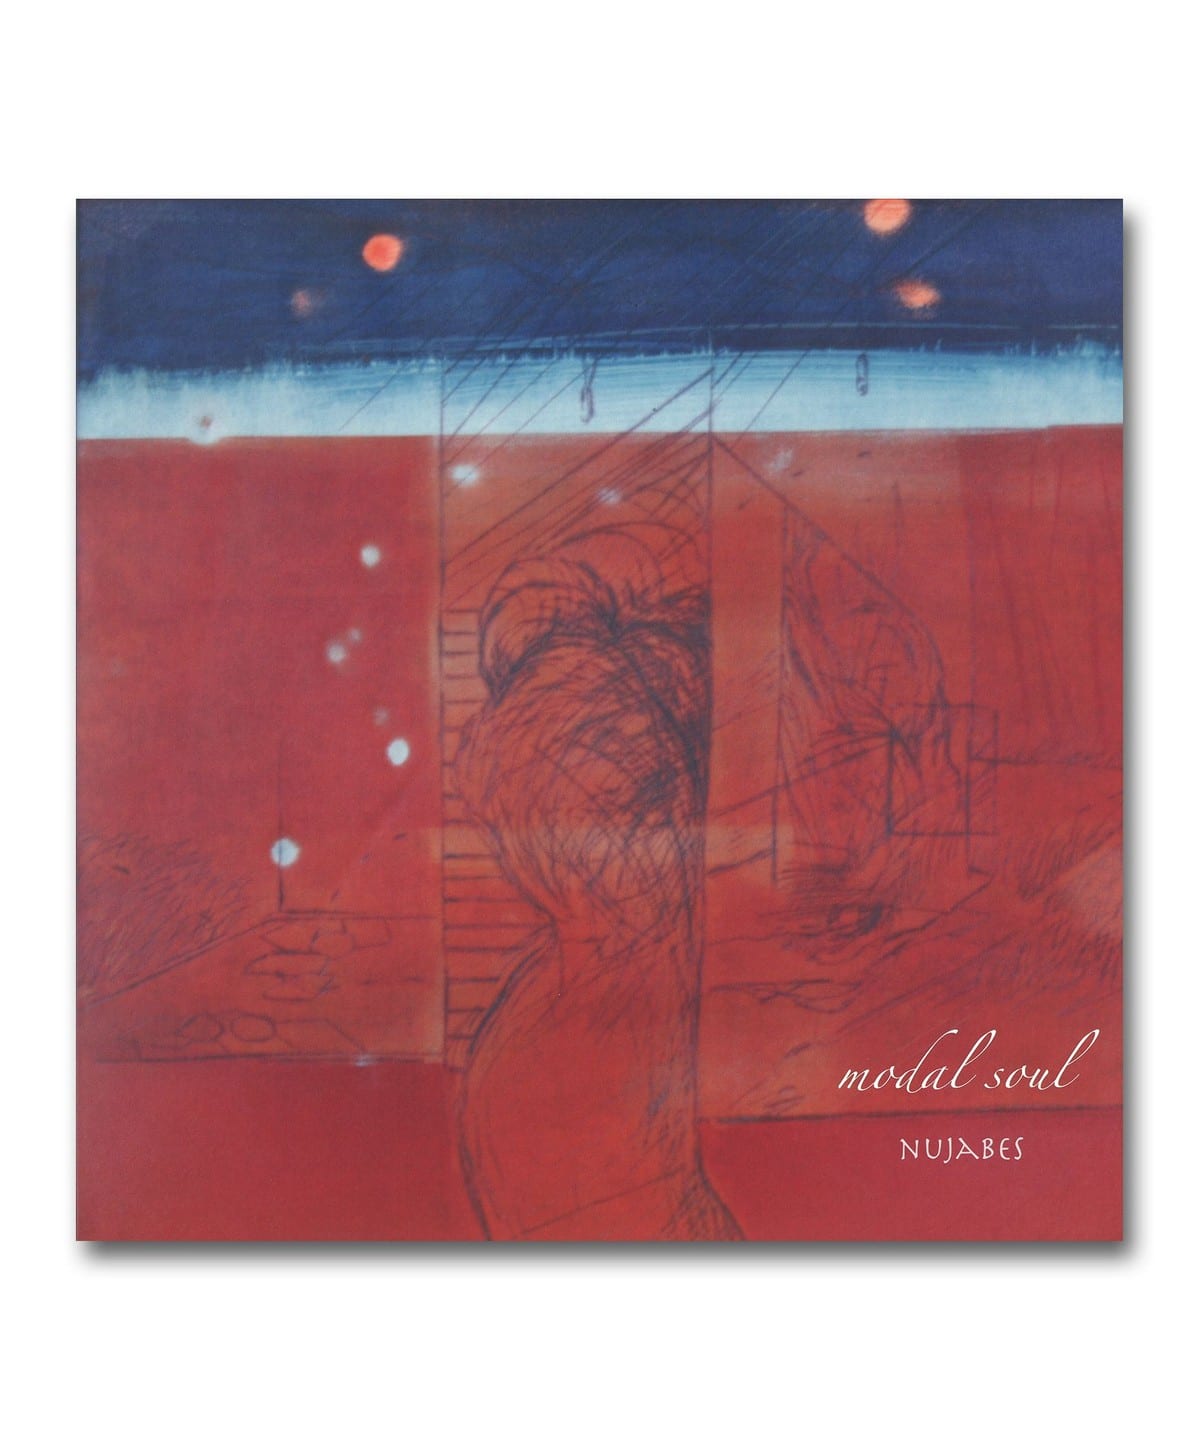 BEAMS RECORDS（ビームス レコーズ）【2LP】Nujabes / Modal 